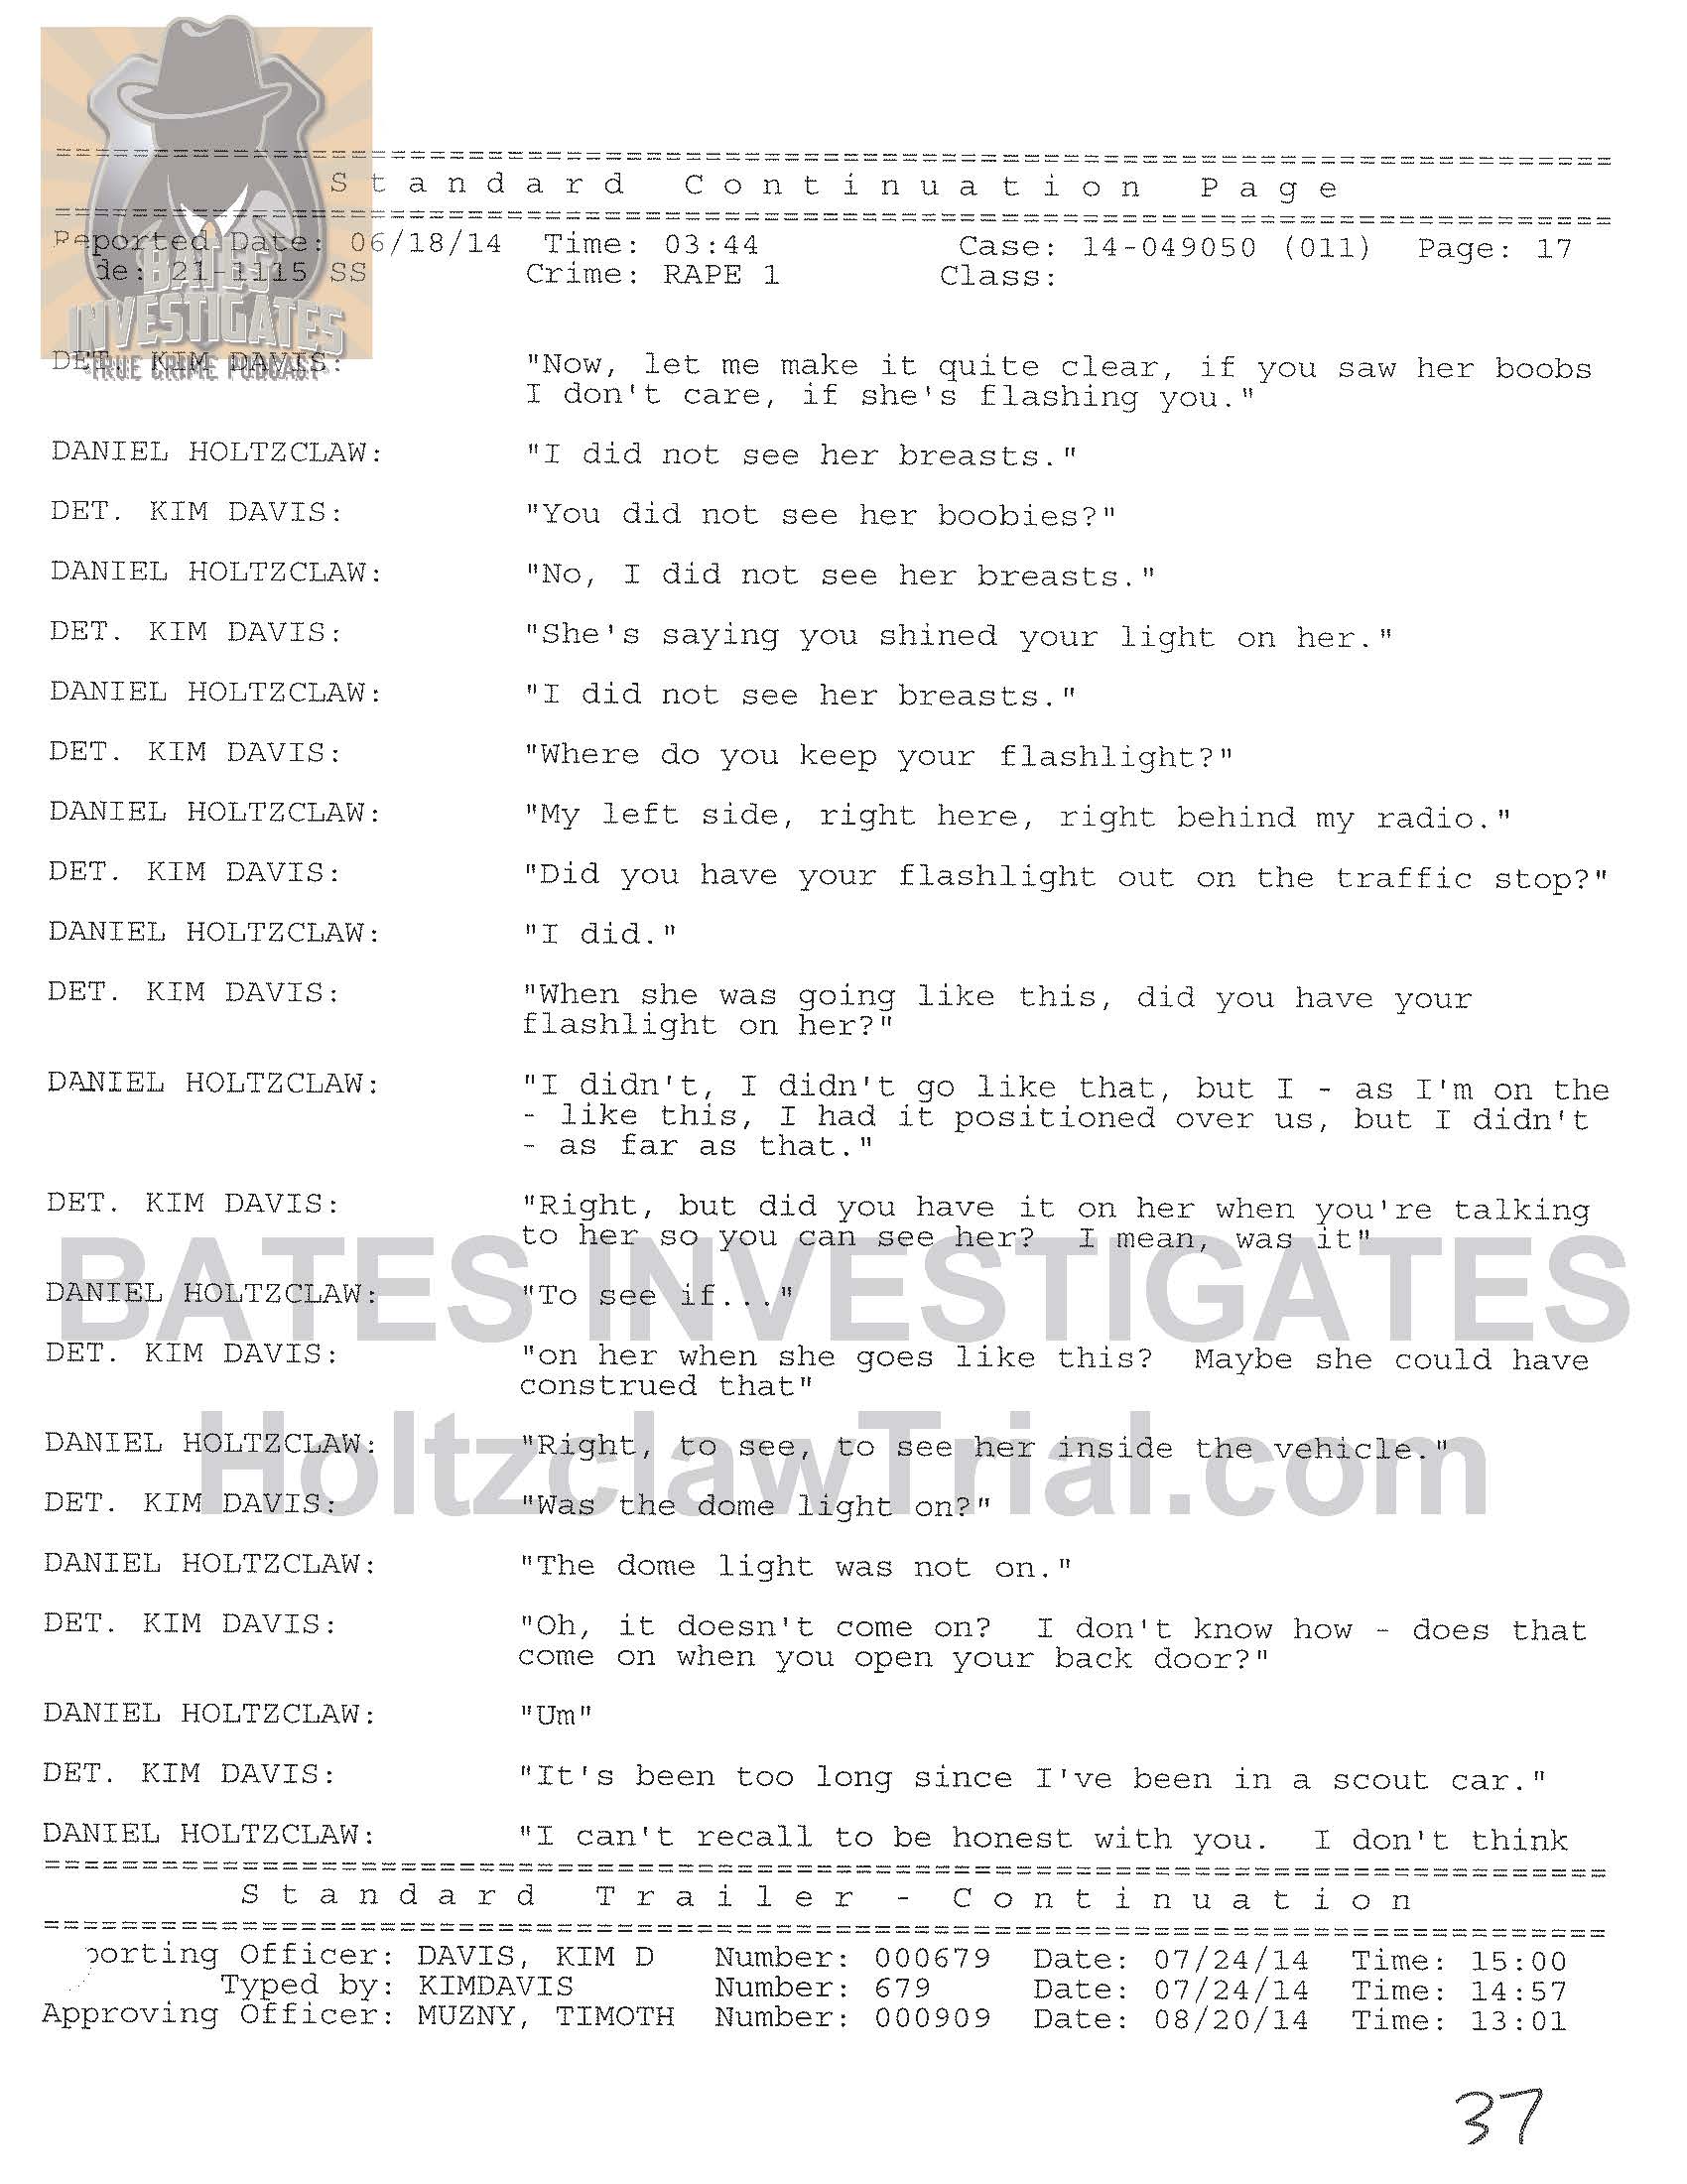 Holtzclaw Interrogation Transcript - Ep02 Redacted_Page_17.jpg